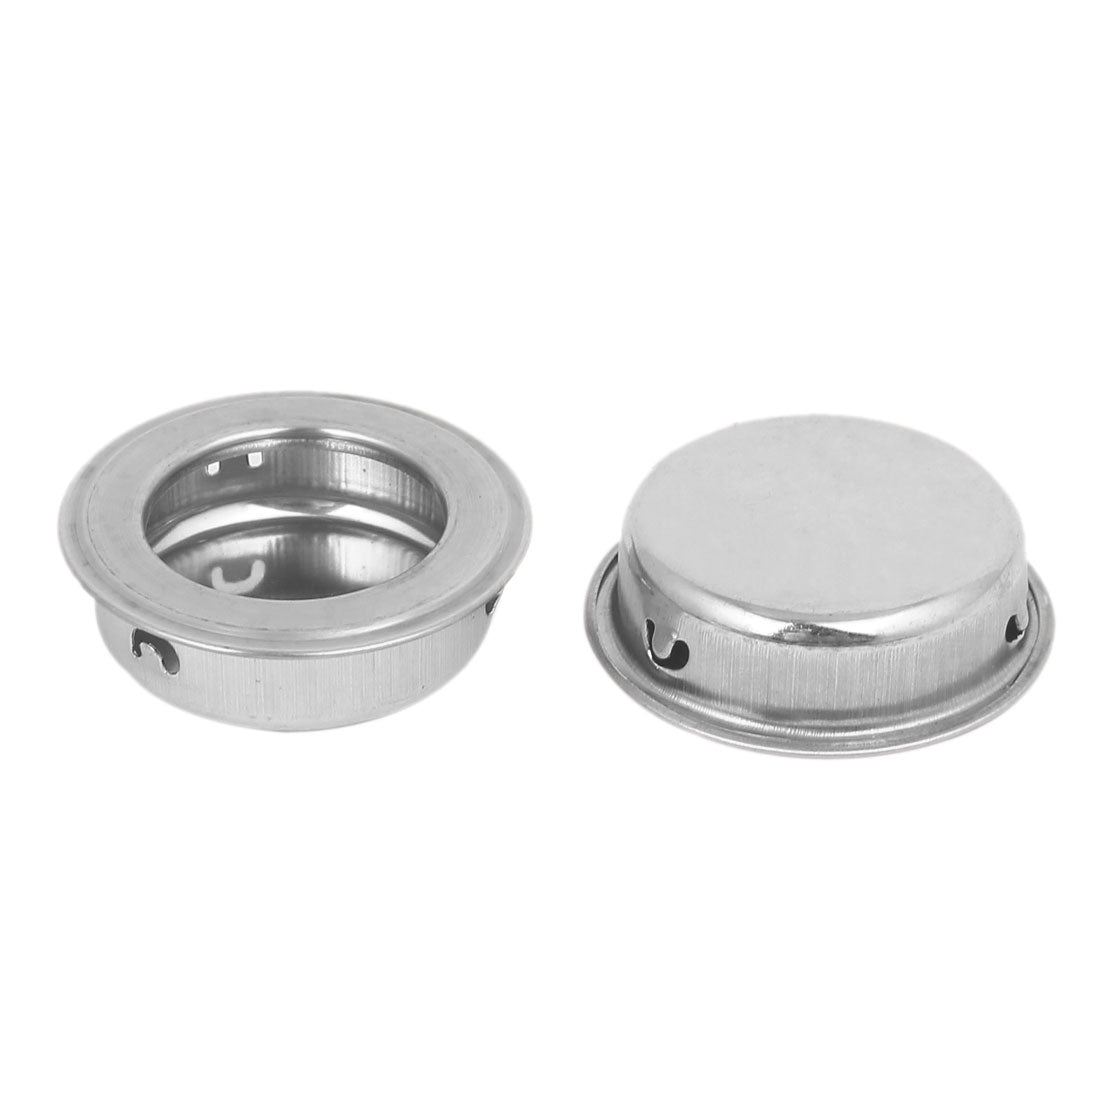 uxcell Uxcell Drawer 304 Stainless Steel Embedded Round Flush Pull Handle 35mm Diameter 2pcs